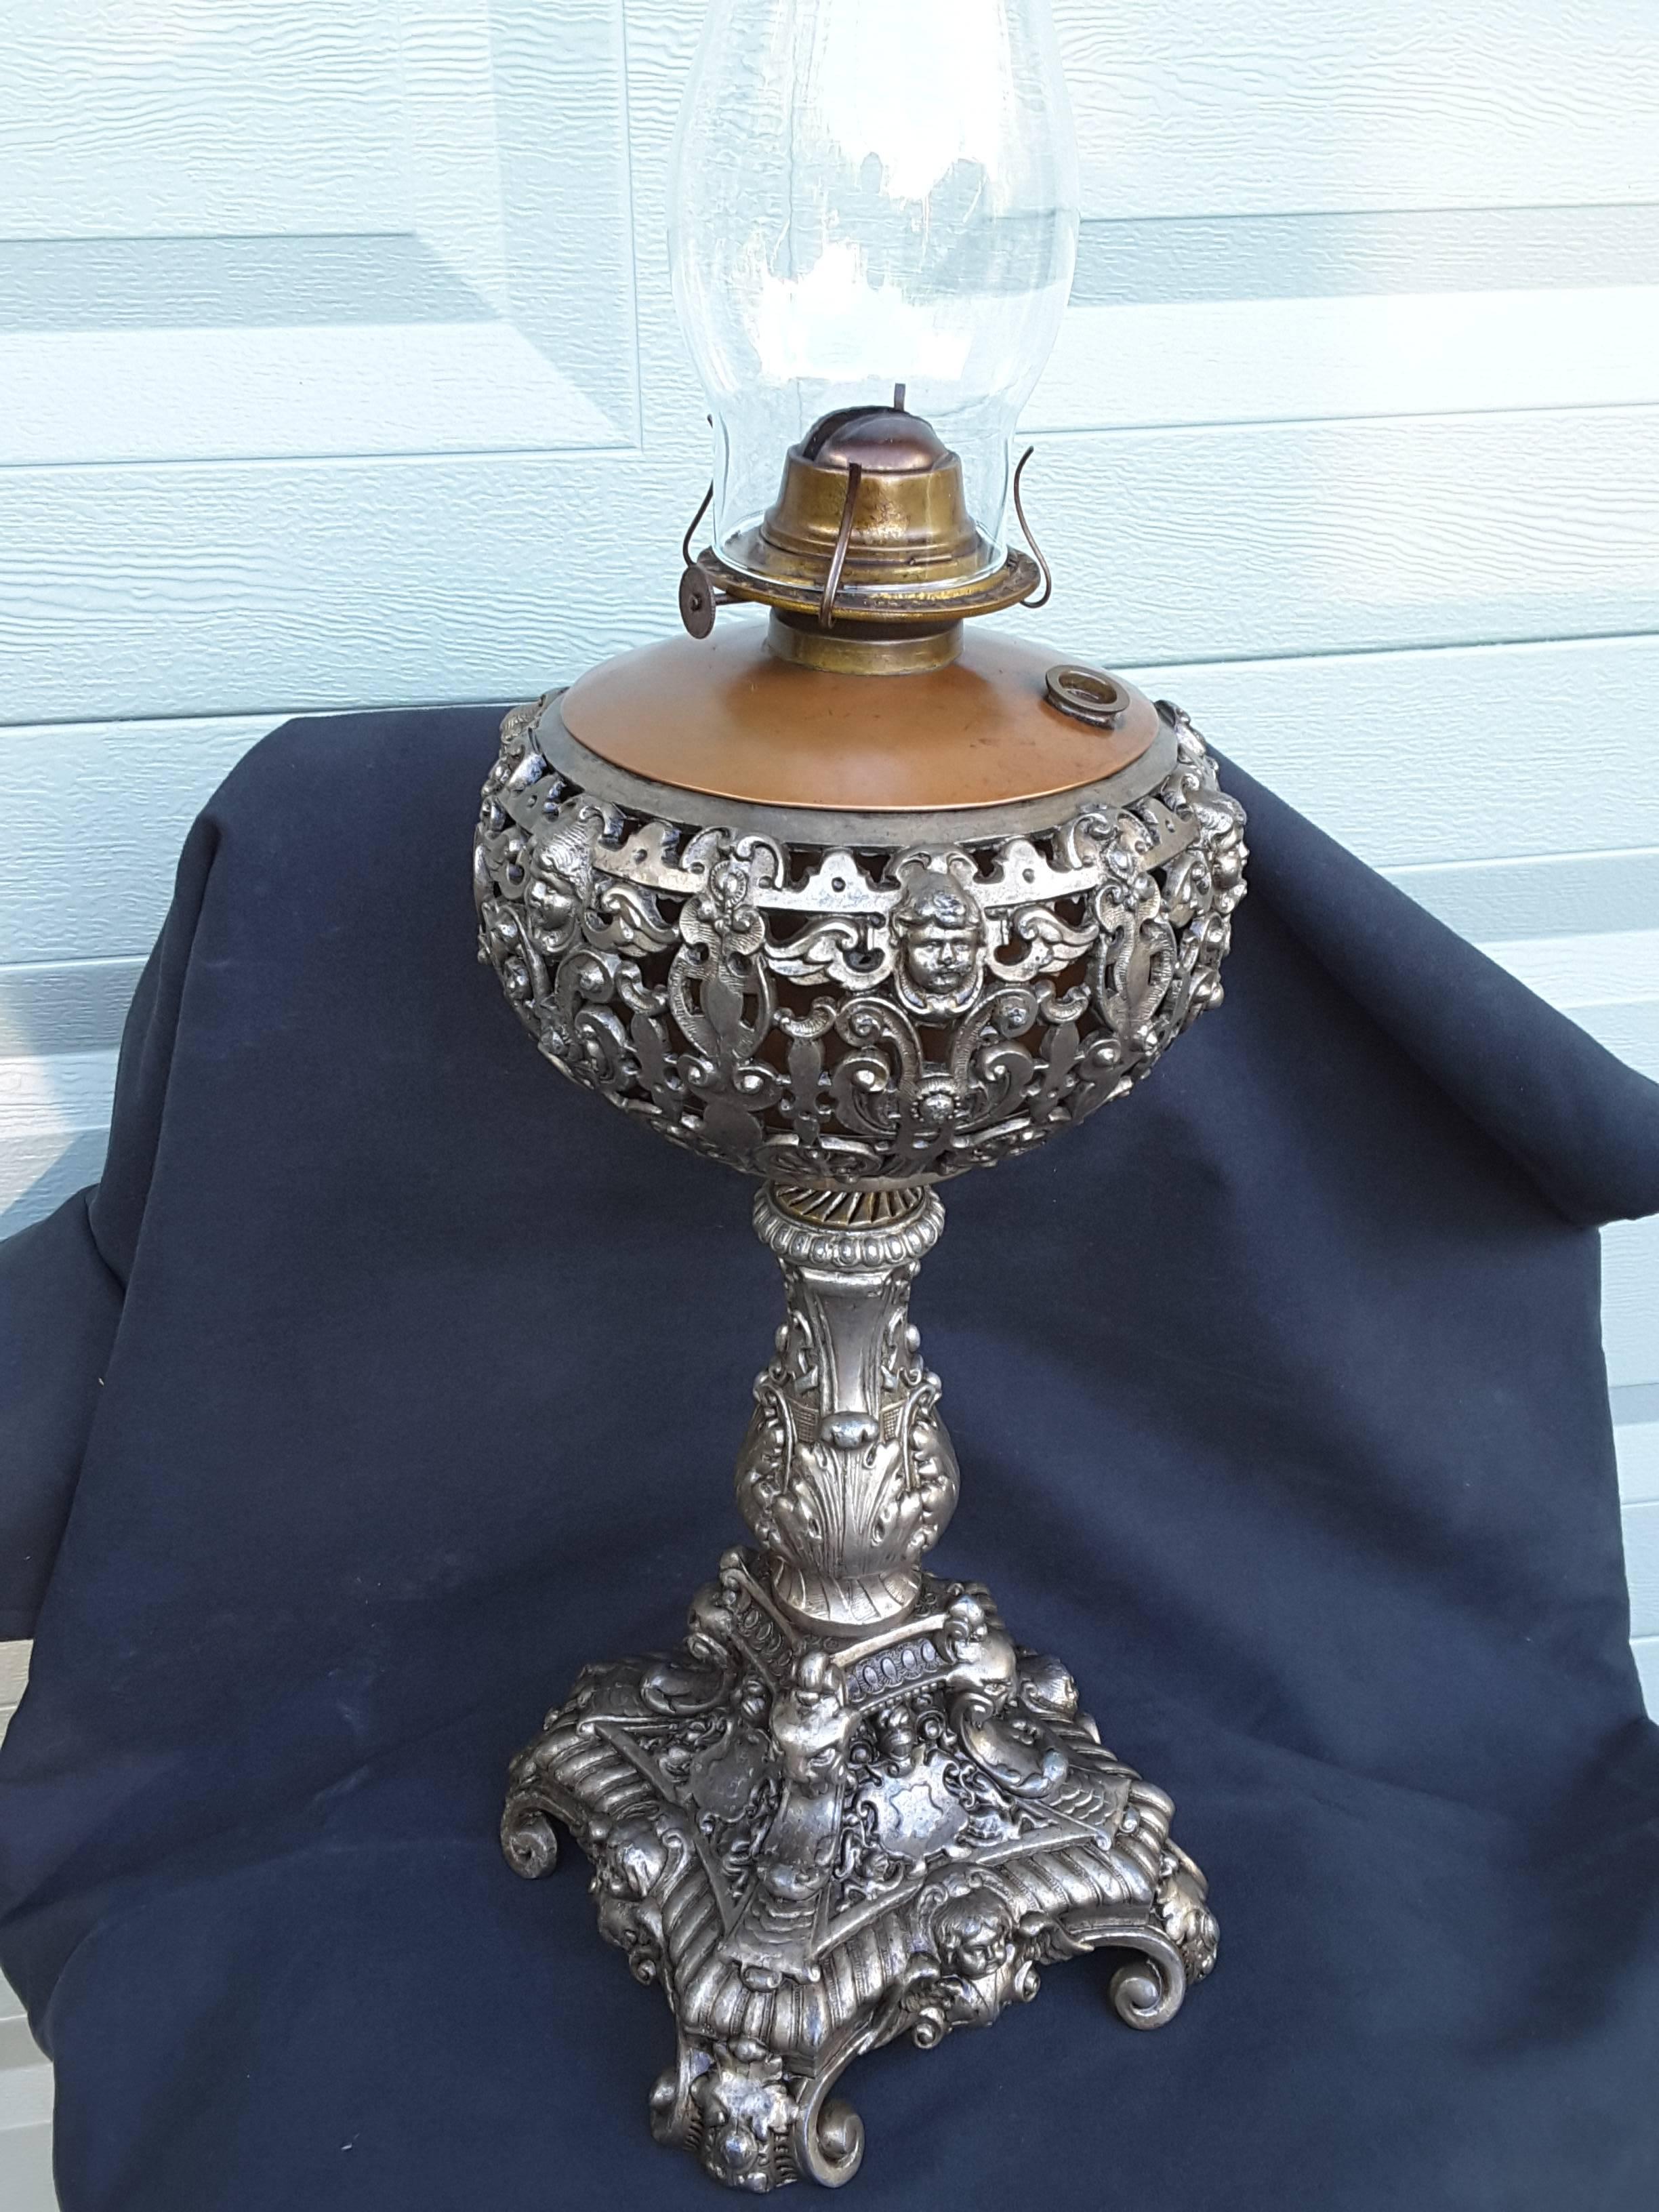 Angel face with wings oil lamp, silver tone finish, scrolled foot and acanthus leaf decoration. The kerosene pot is made of copper and a brass burner, still functions as an oil lamp and has not been drilled for a lamp. The lamp measures 17